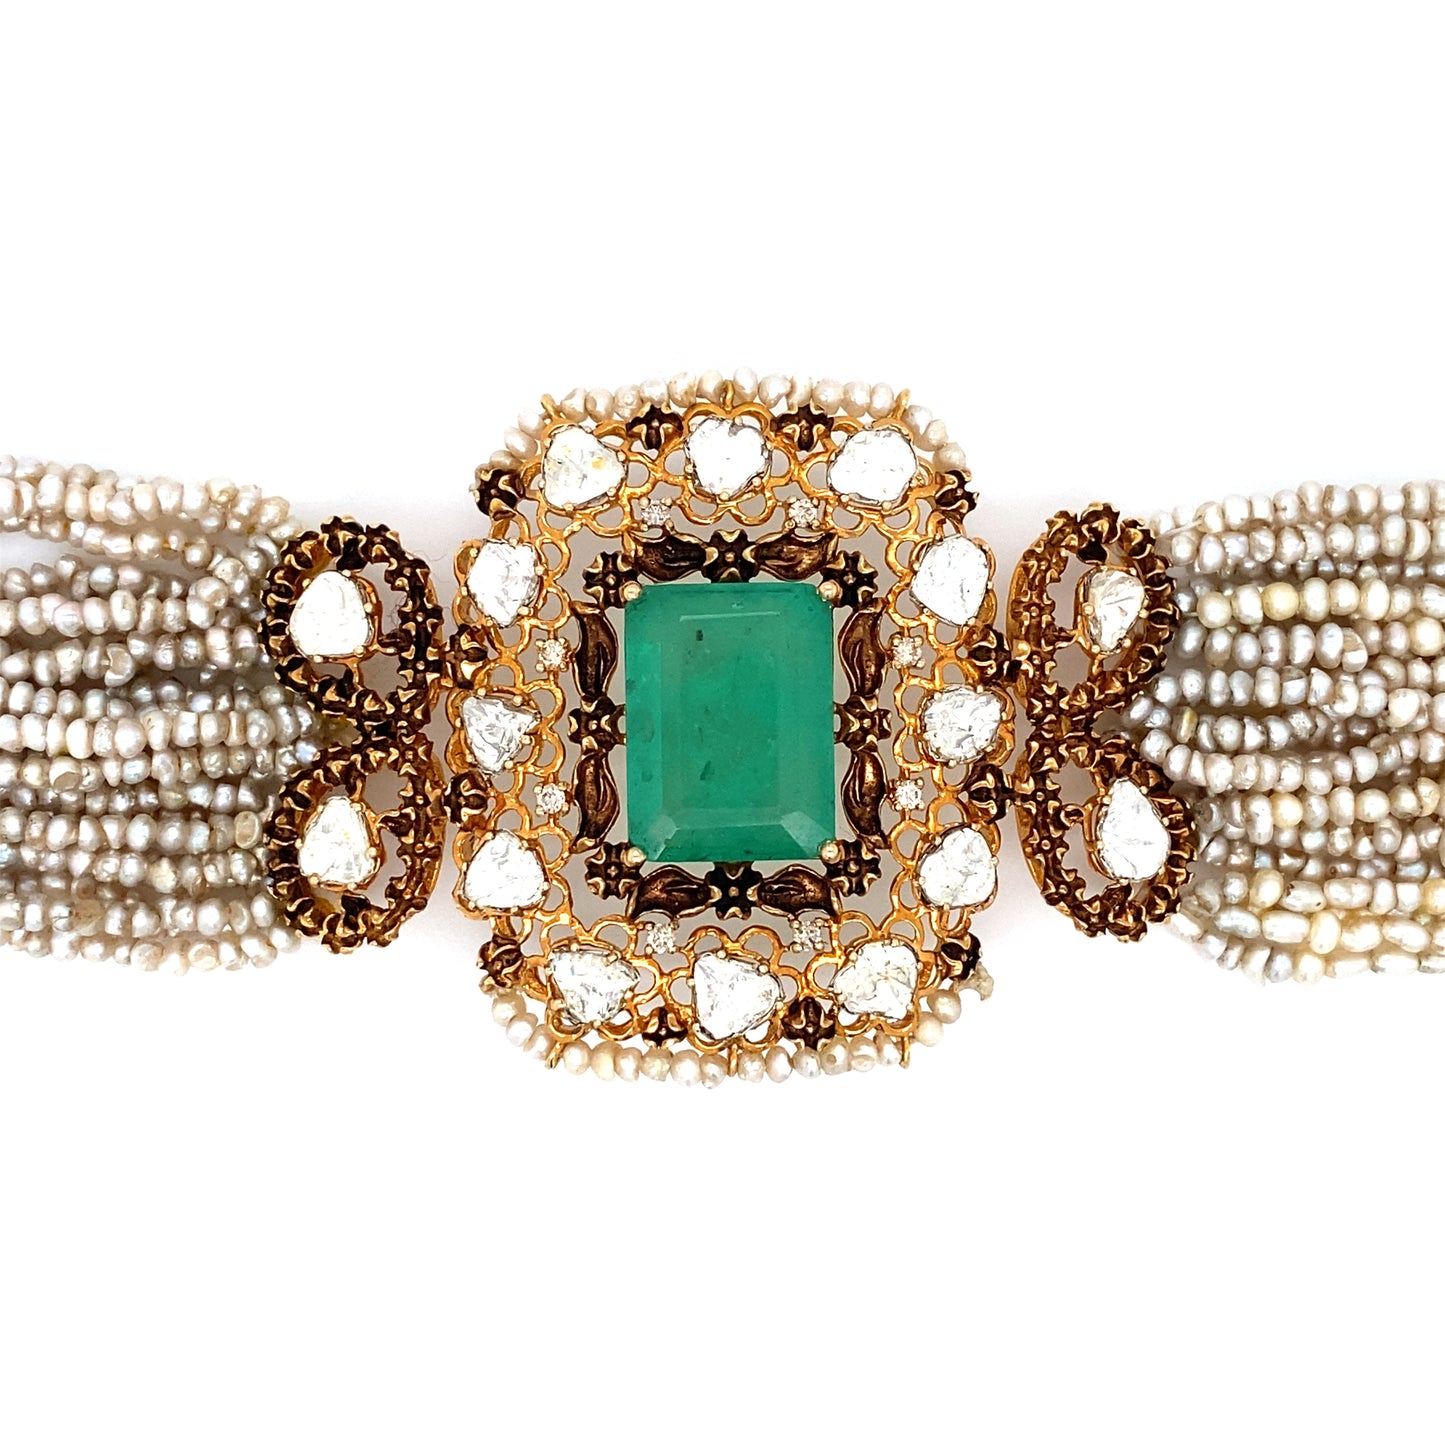 Circa 1950s Victorian Revival Seed Pearl and Emerald Bracelet in 14K Gold